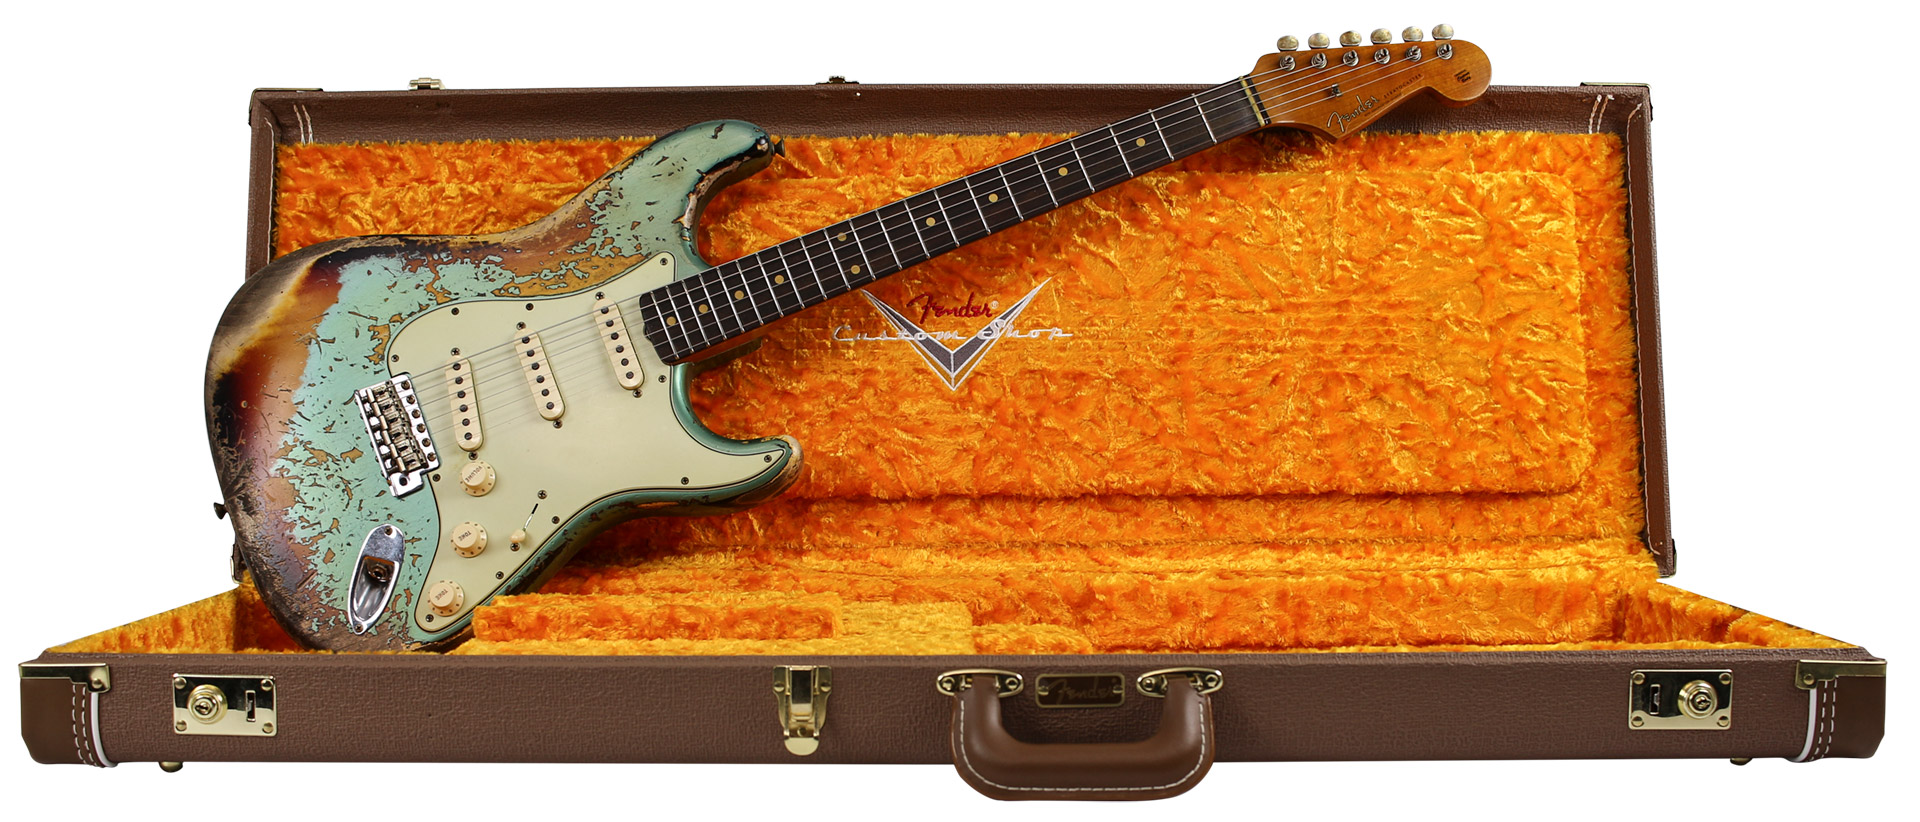 GUITARRA FENDER 60/63 STRATOCASTER SUPER HEVY RELIC LTD EDITION 923-1011-940 AGED SHERWOOD OVER 3TS